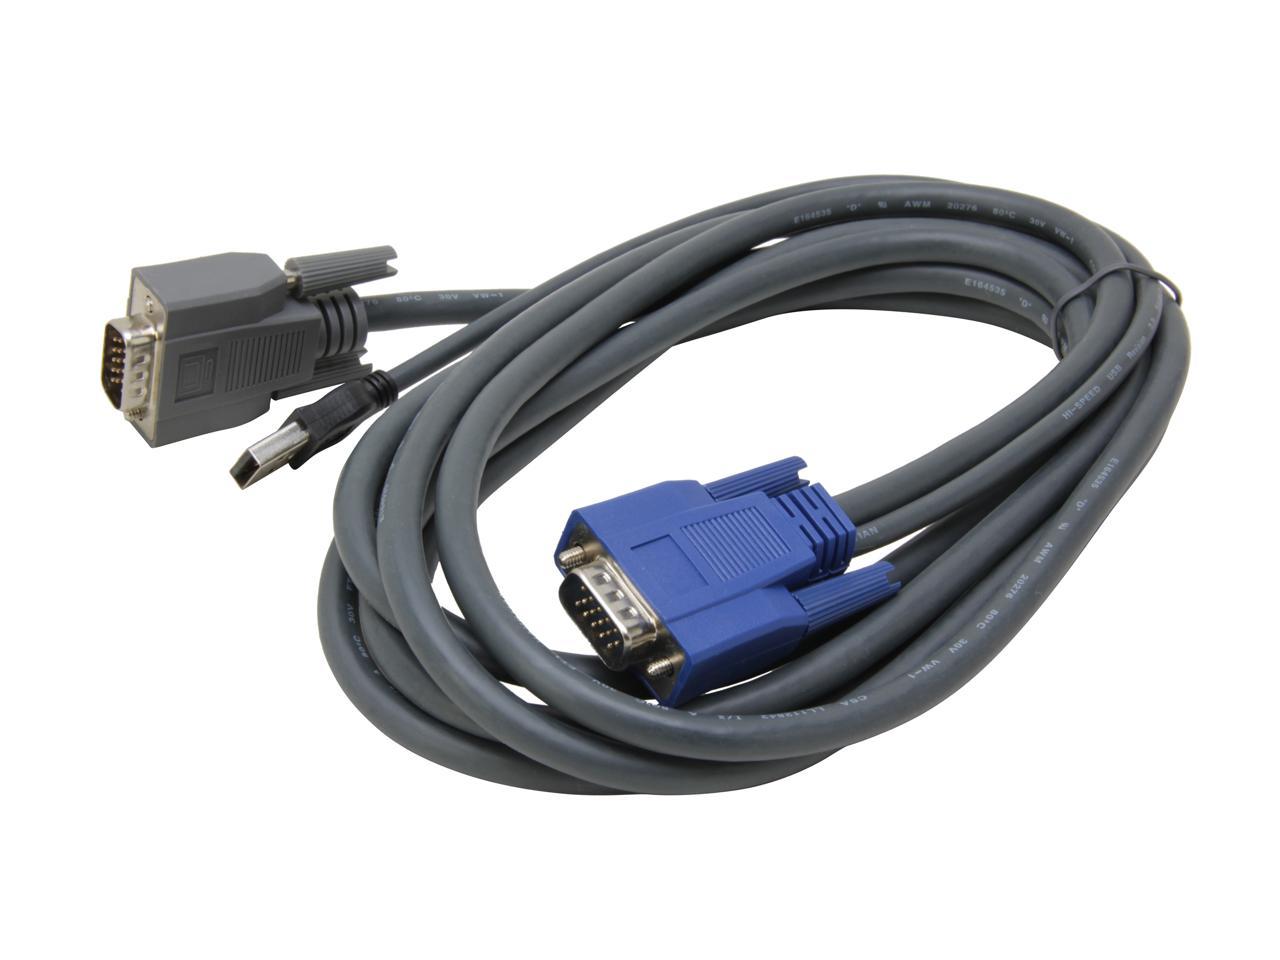 StarTech.com 10 ft. Ultra-Thin USB VGA 2-in-1 KVM Cable SVUSBVGA10 - image 3 of 3